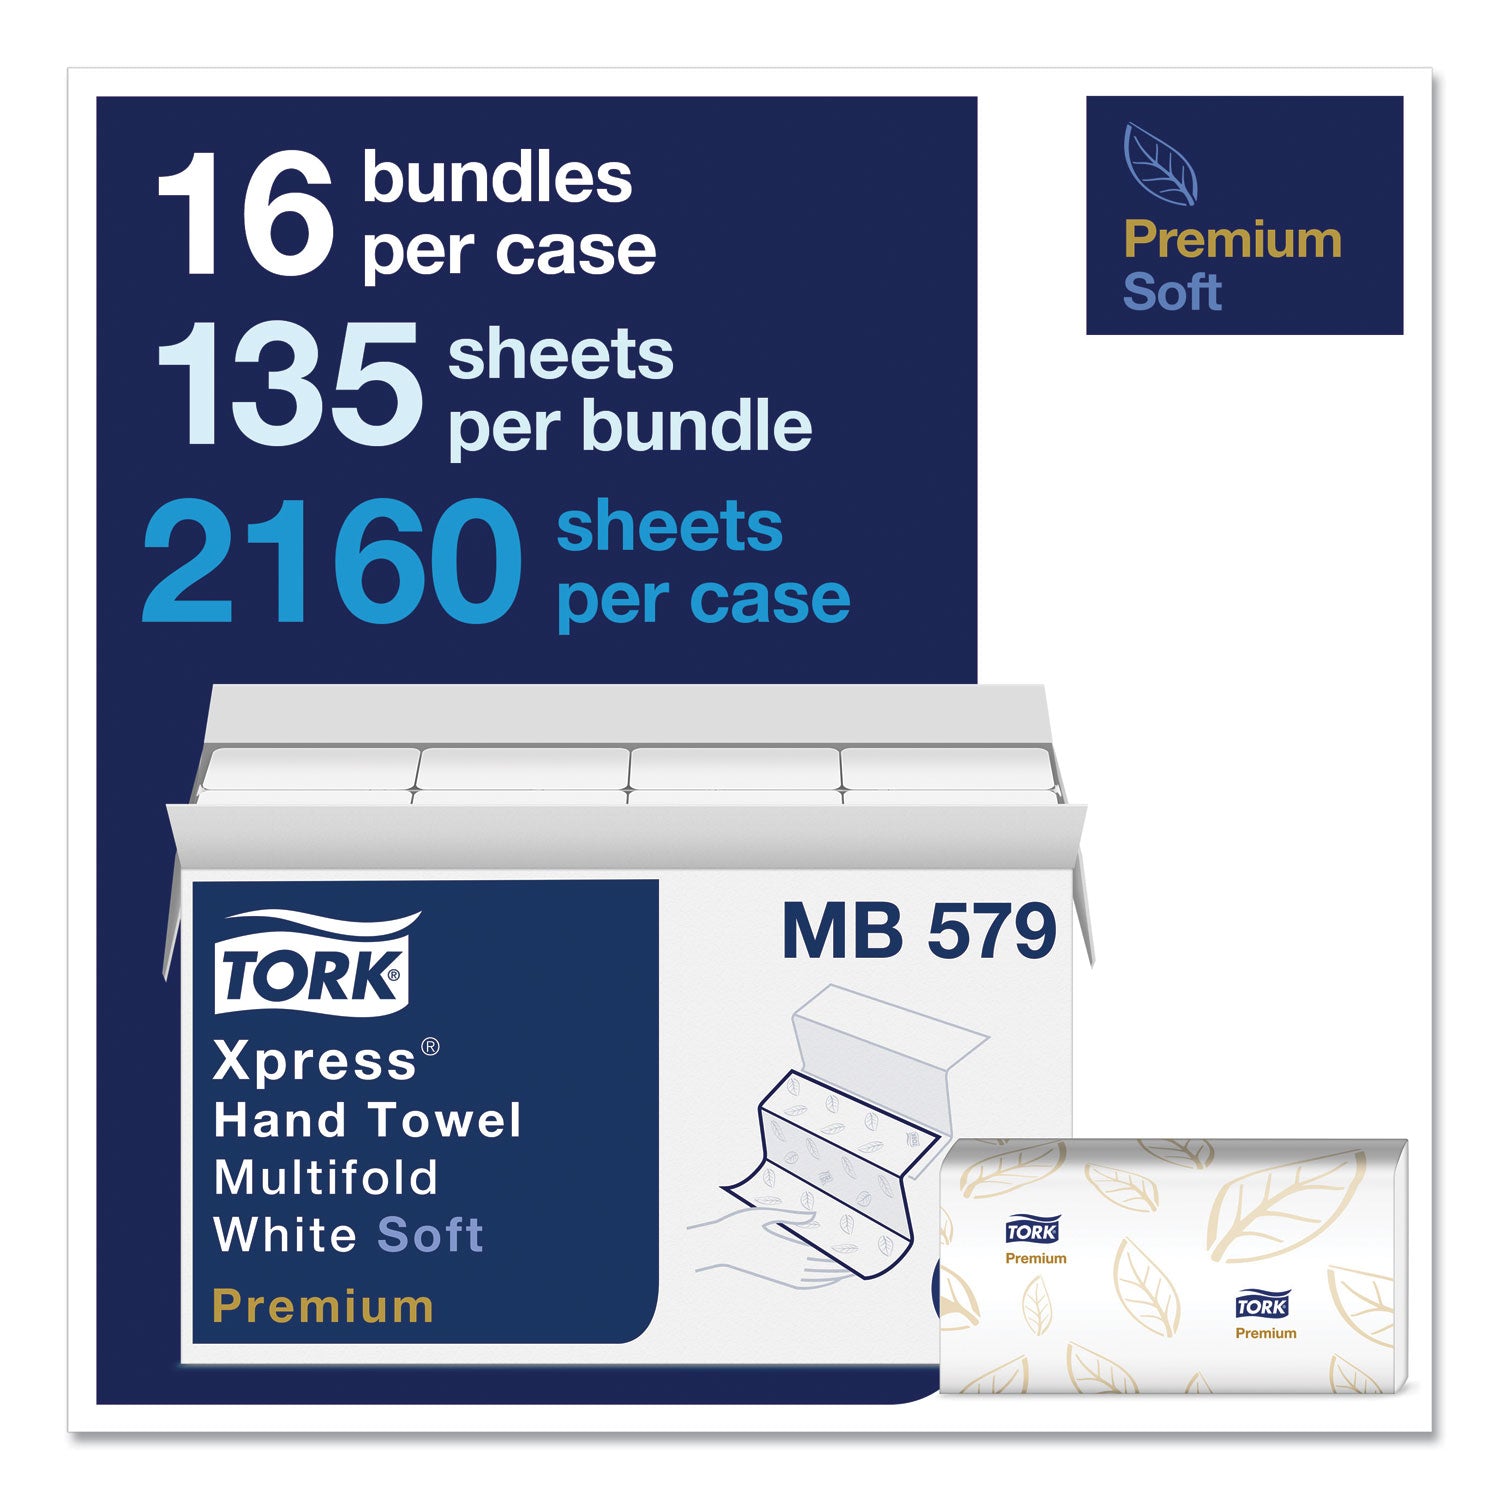 premium-soft-xpress-3-panel-multifold-hand-towels-2-ply-913-x-95-white-with-blue-leaf-135-packs-16-packs-carton_trkmb579 - 2